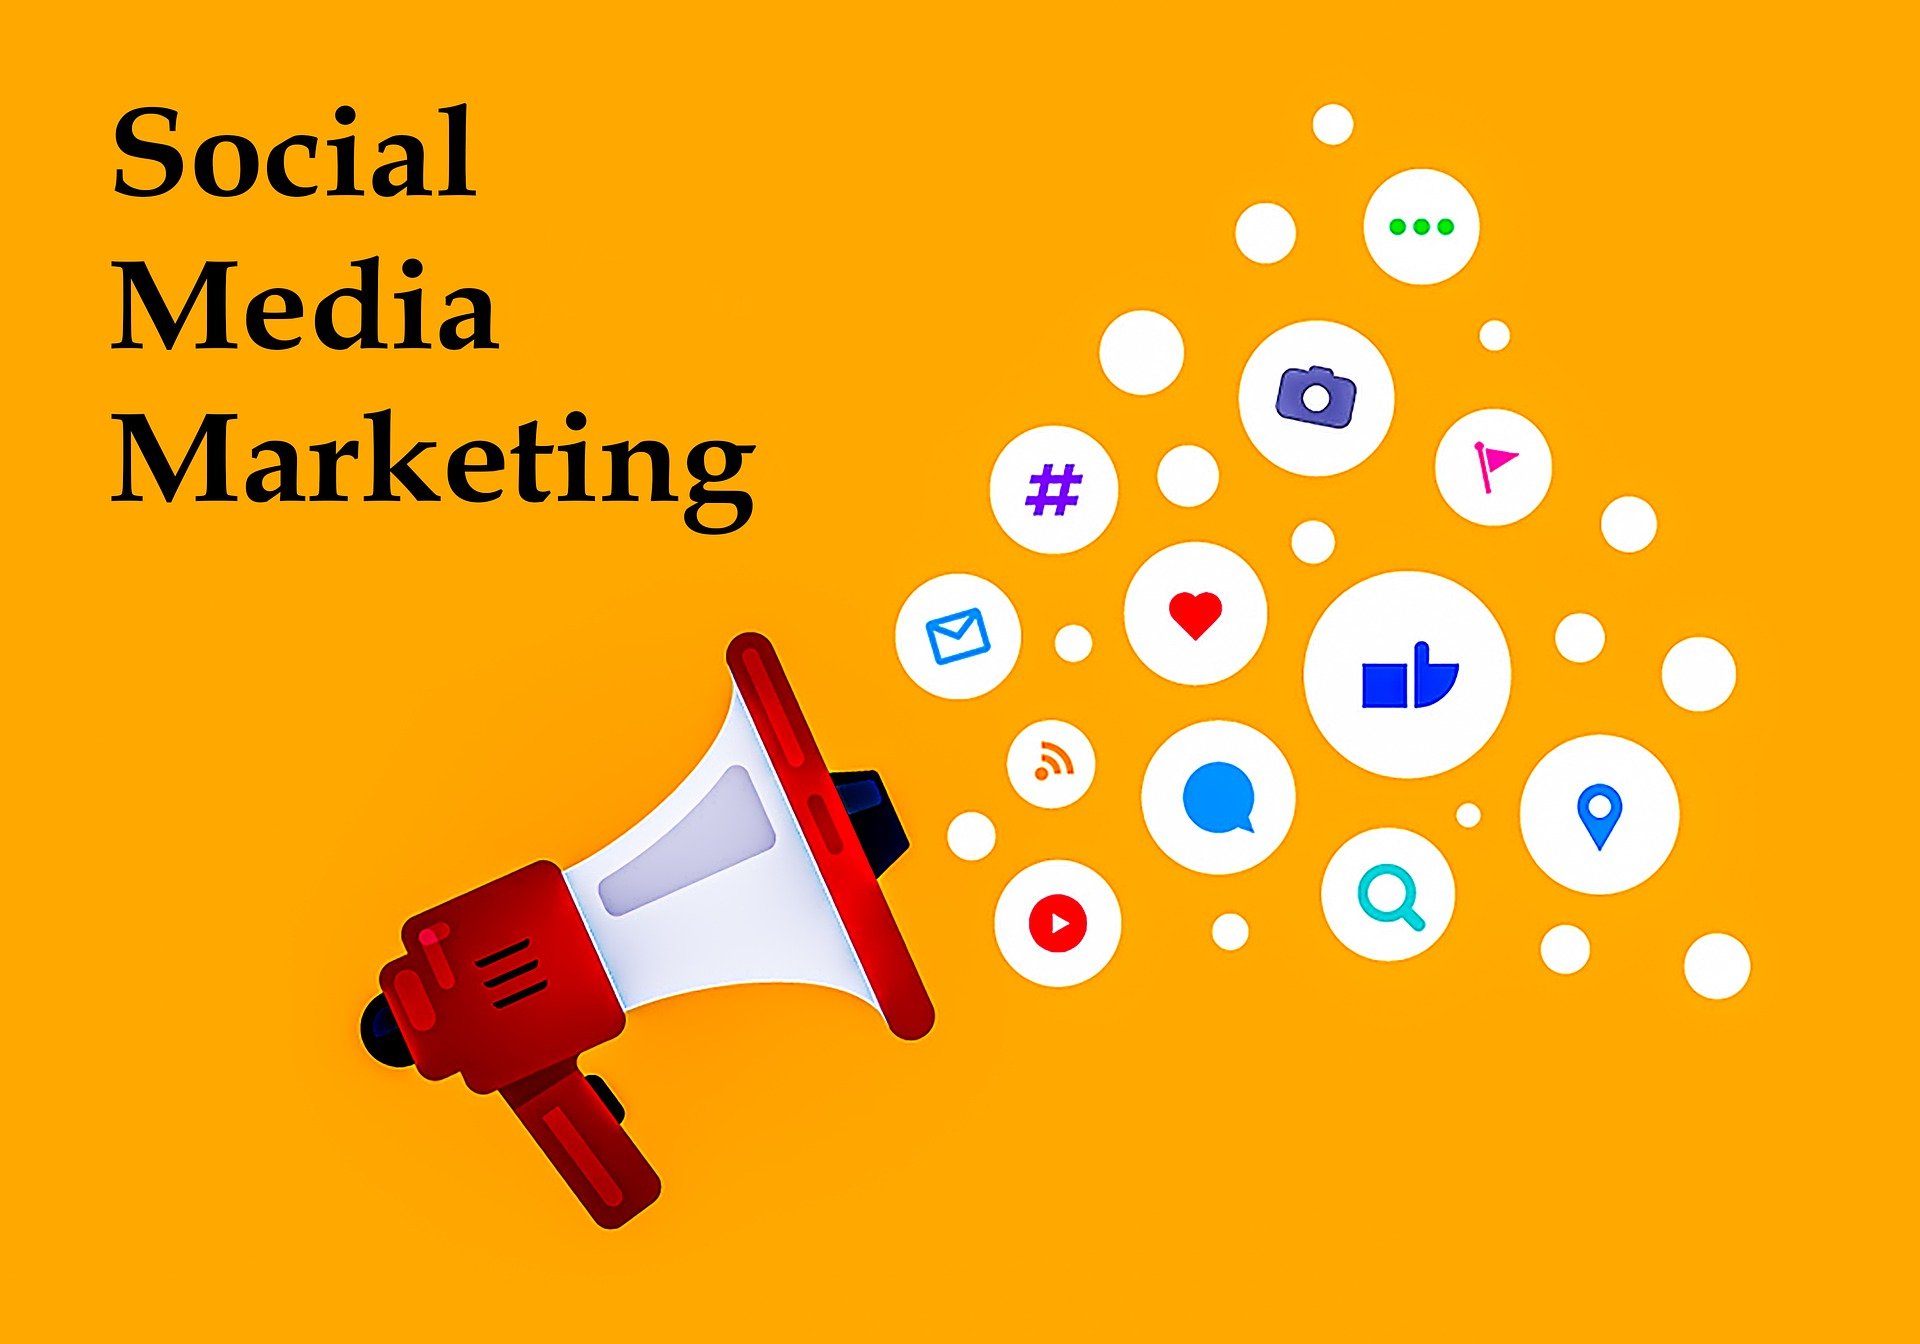 How does a social media marketing agency help grow a business in 2023